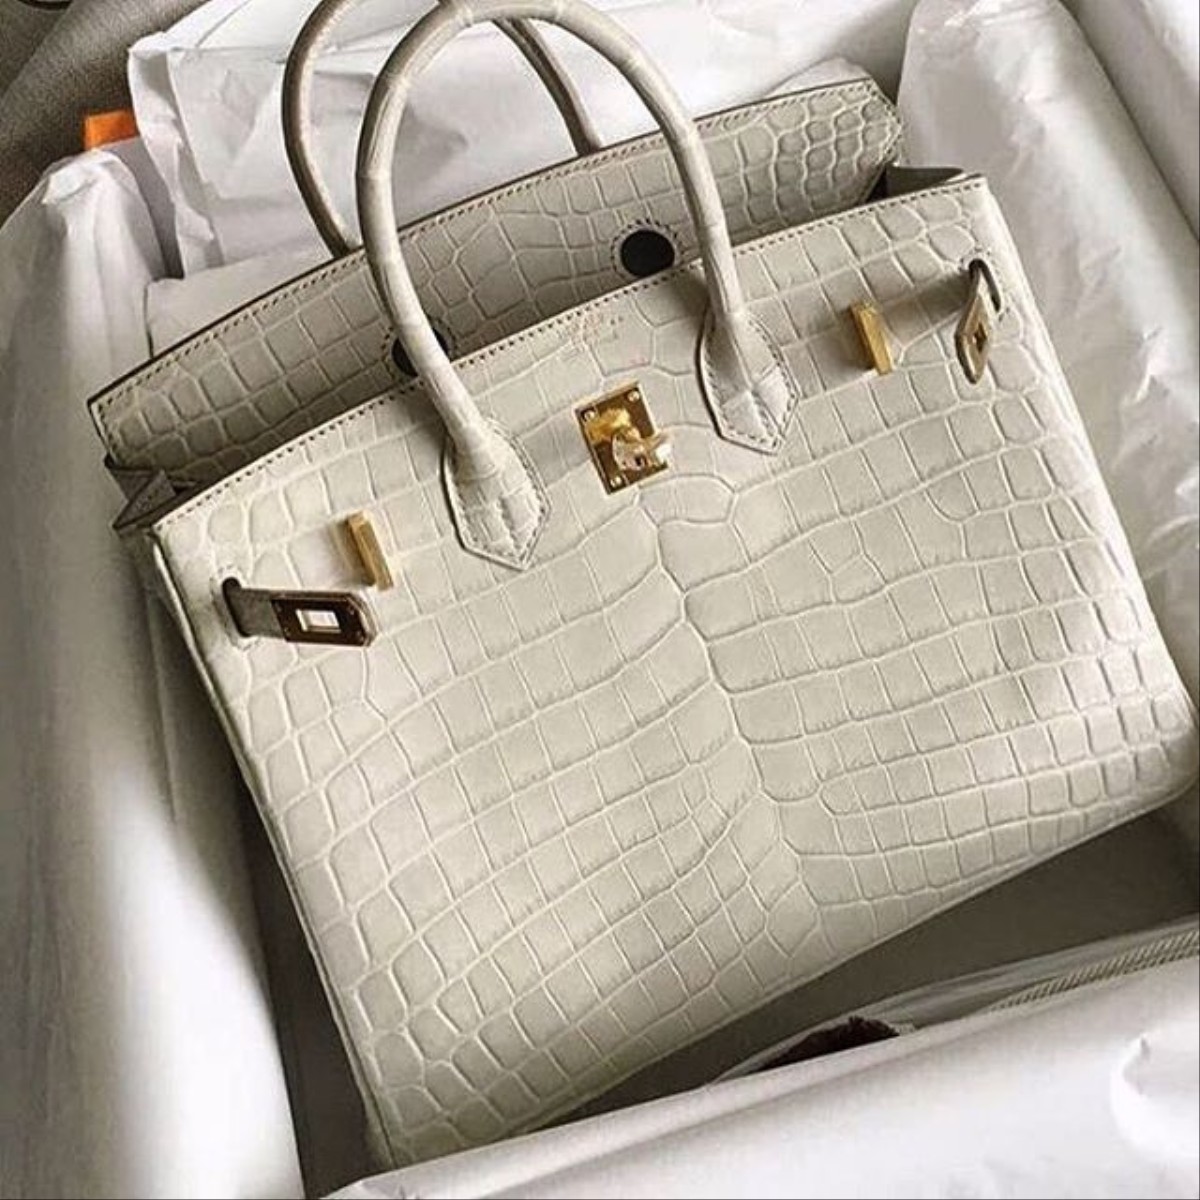 the world's most expensive bag was just sold for $379k